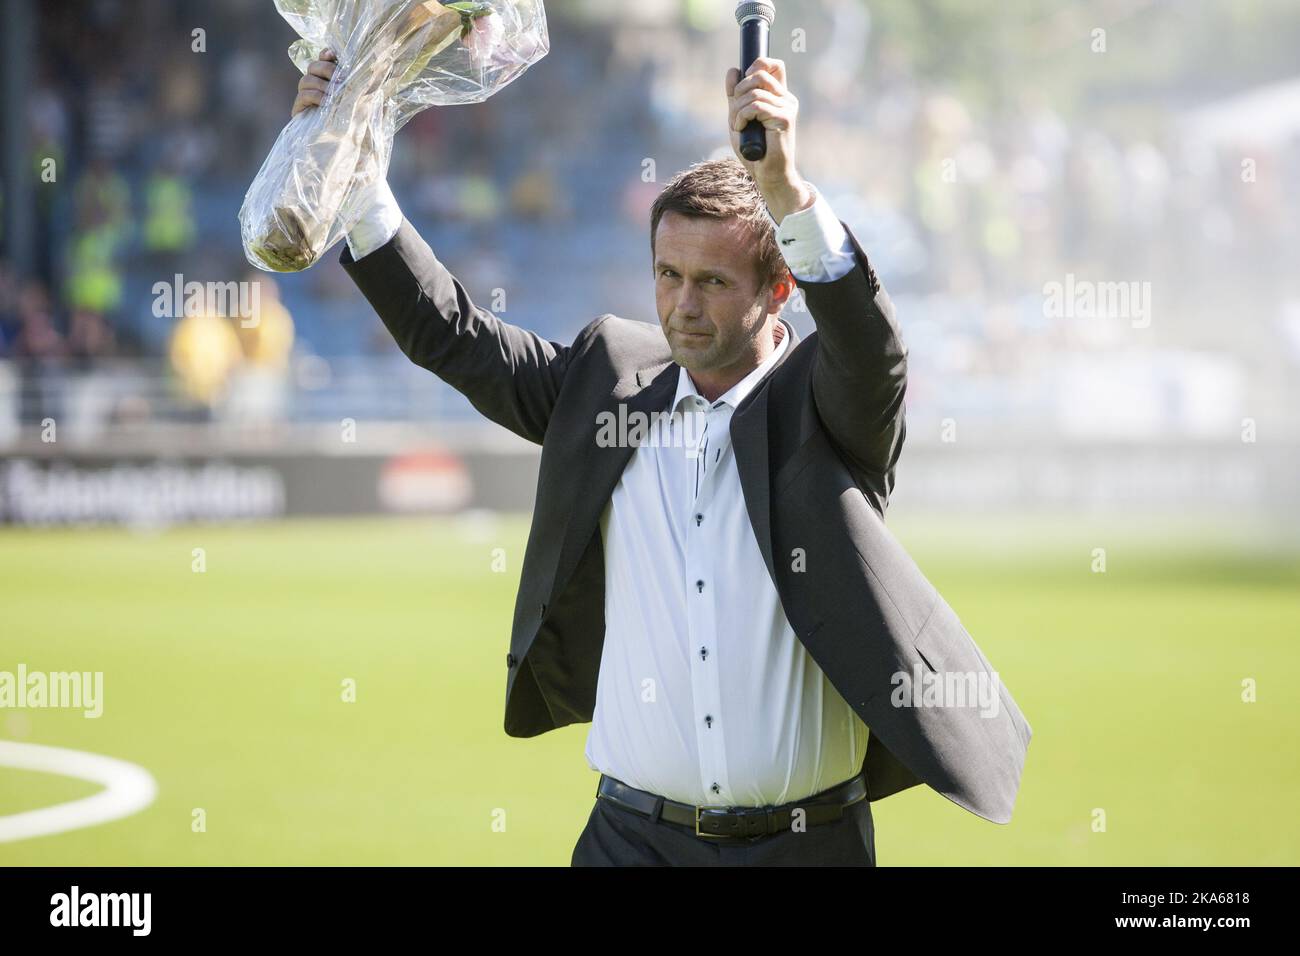 Outgoing manager of Stromsgodset FK and incoming manager of Scottish Premiership club Celtic Ronny Deila reacts after speaking to the supporters after half time of the match between Stromsgodset and Haugesund in the Norwegian top football league in Drammen, 9 June 2014. Photo by Audun Braastad, NTB scanpix Stock Photo